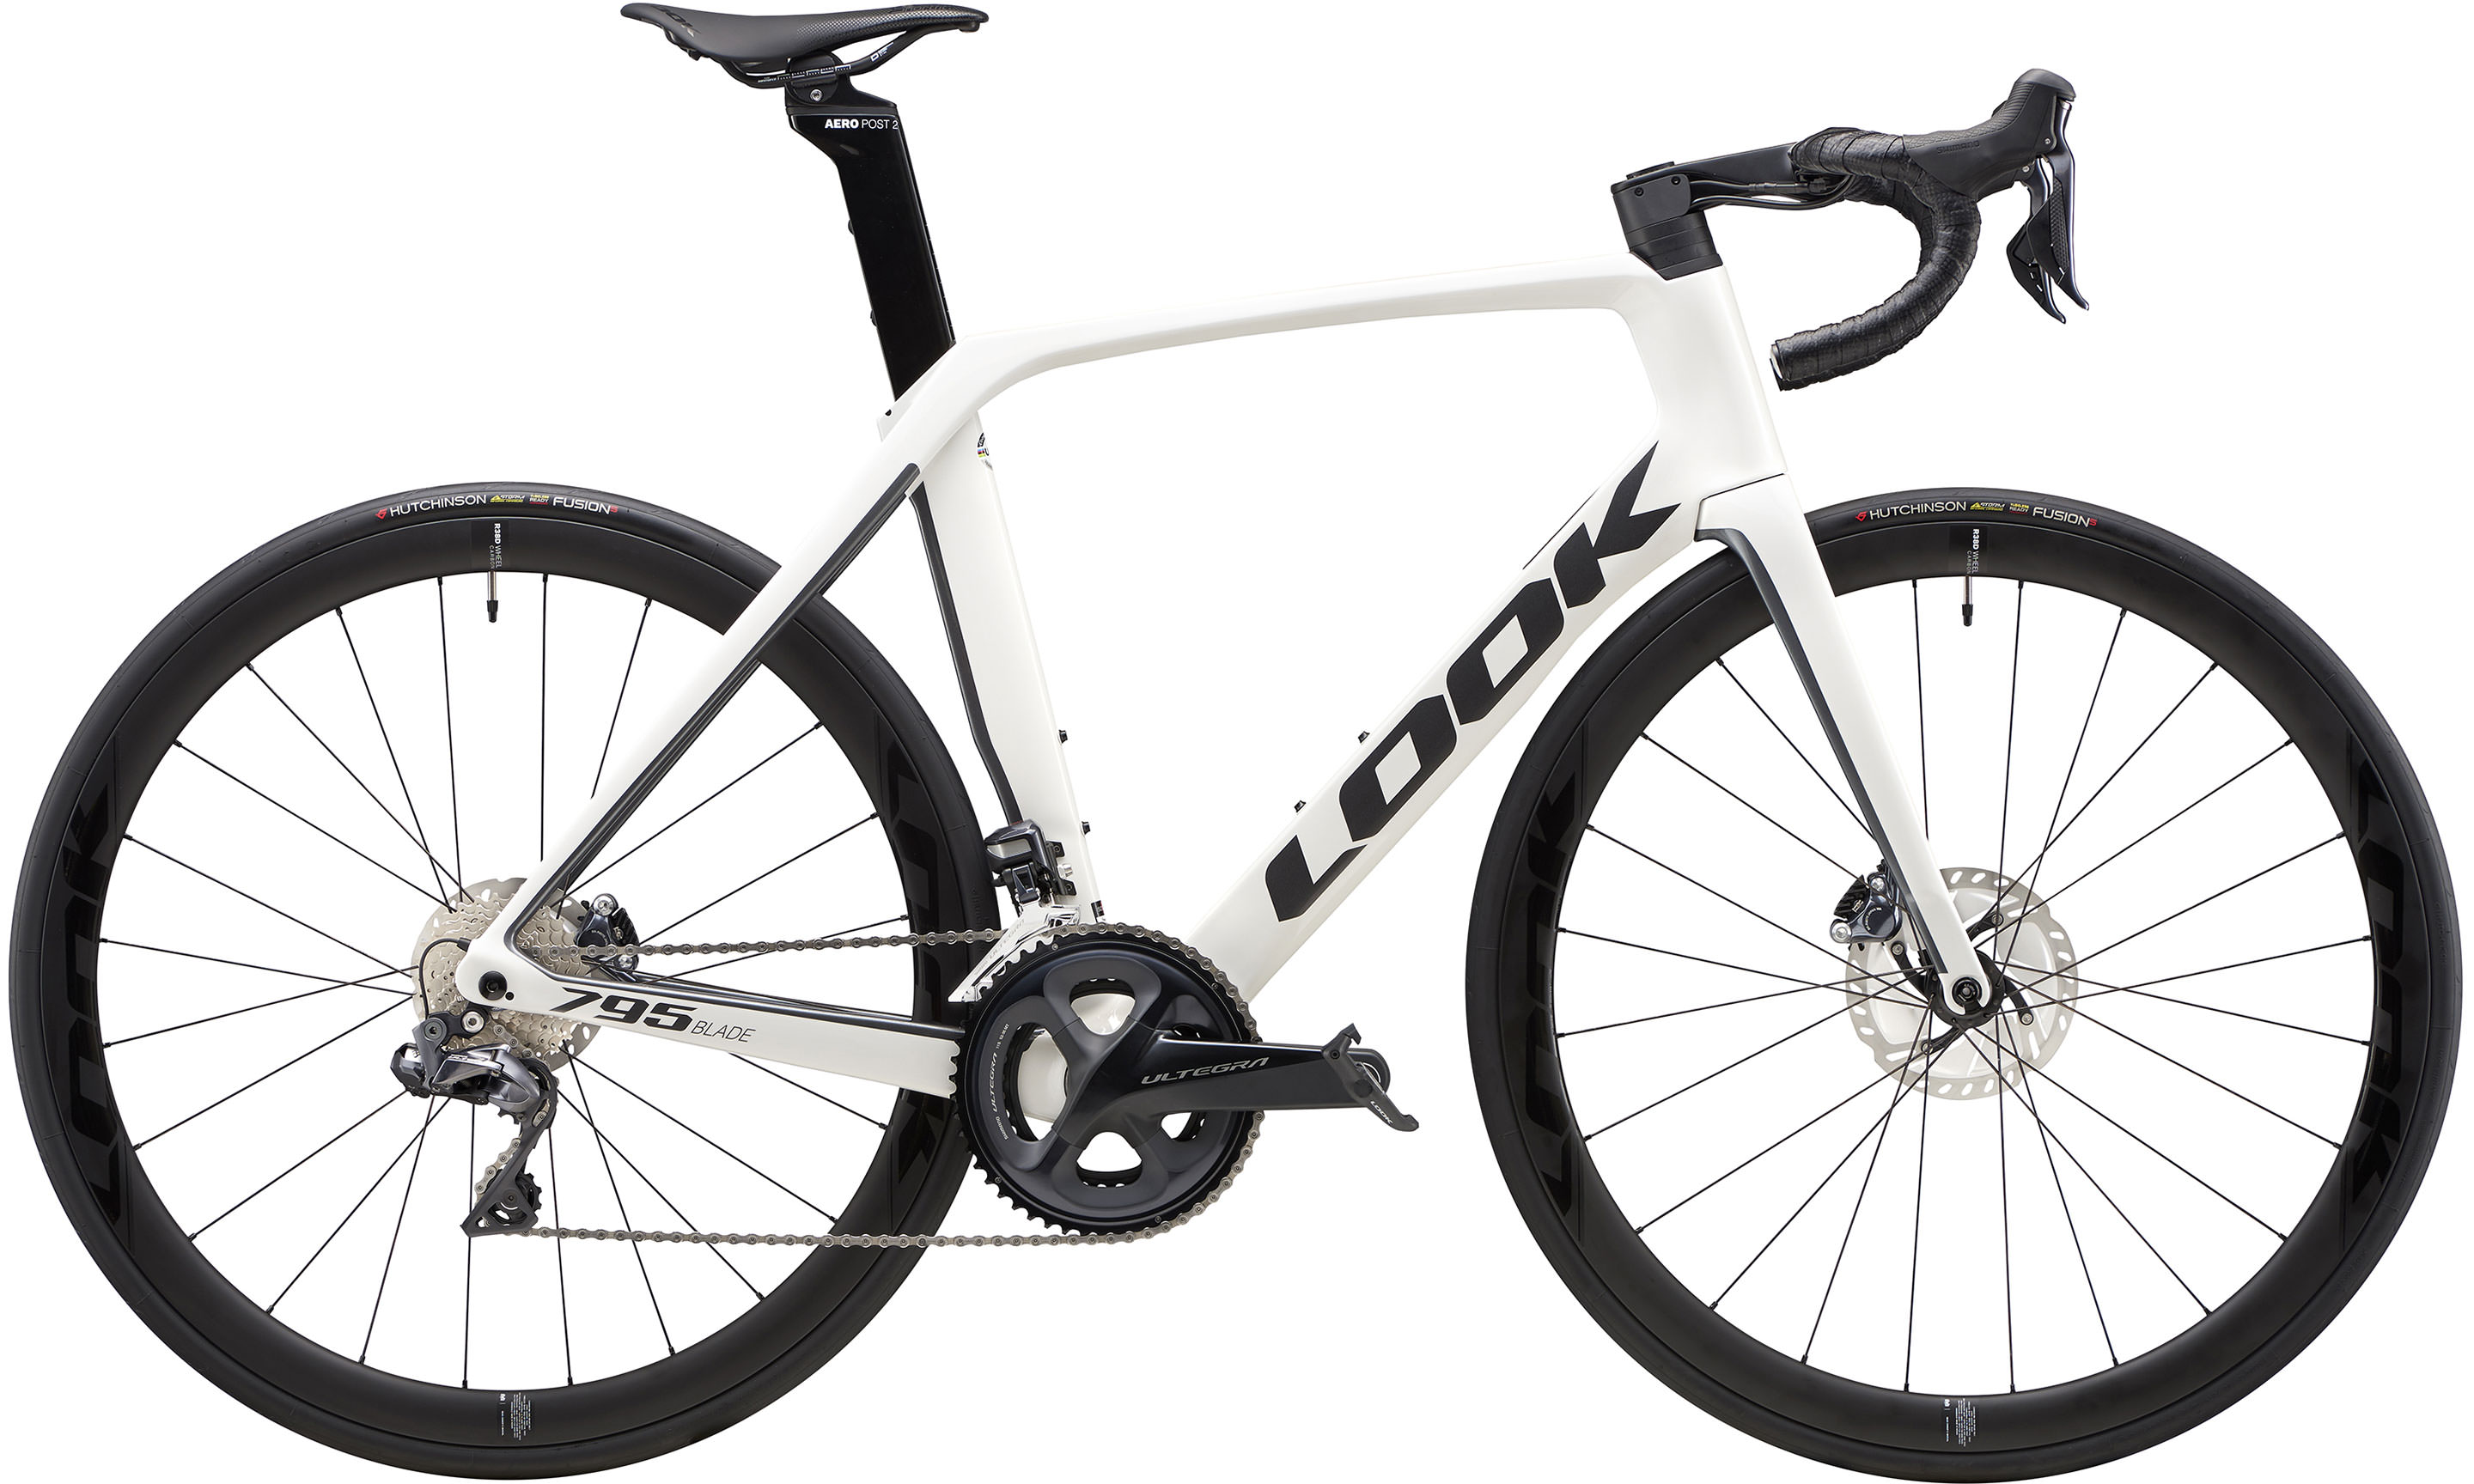 795 BLADE DISC METALLIC WHITE GRAPHITE GREY GLOSSY | Bouticycle